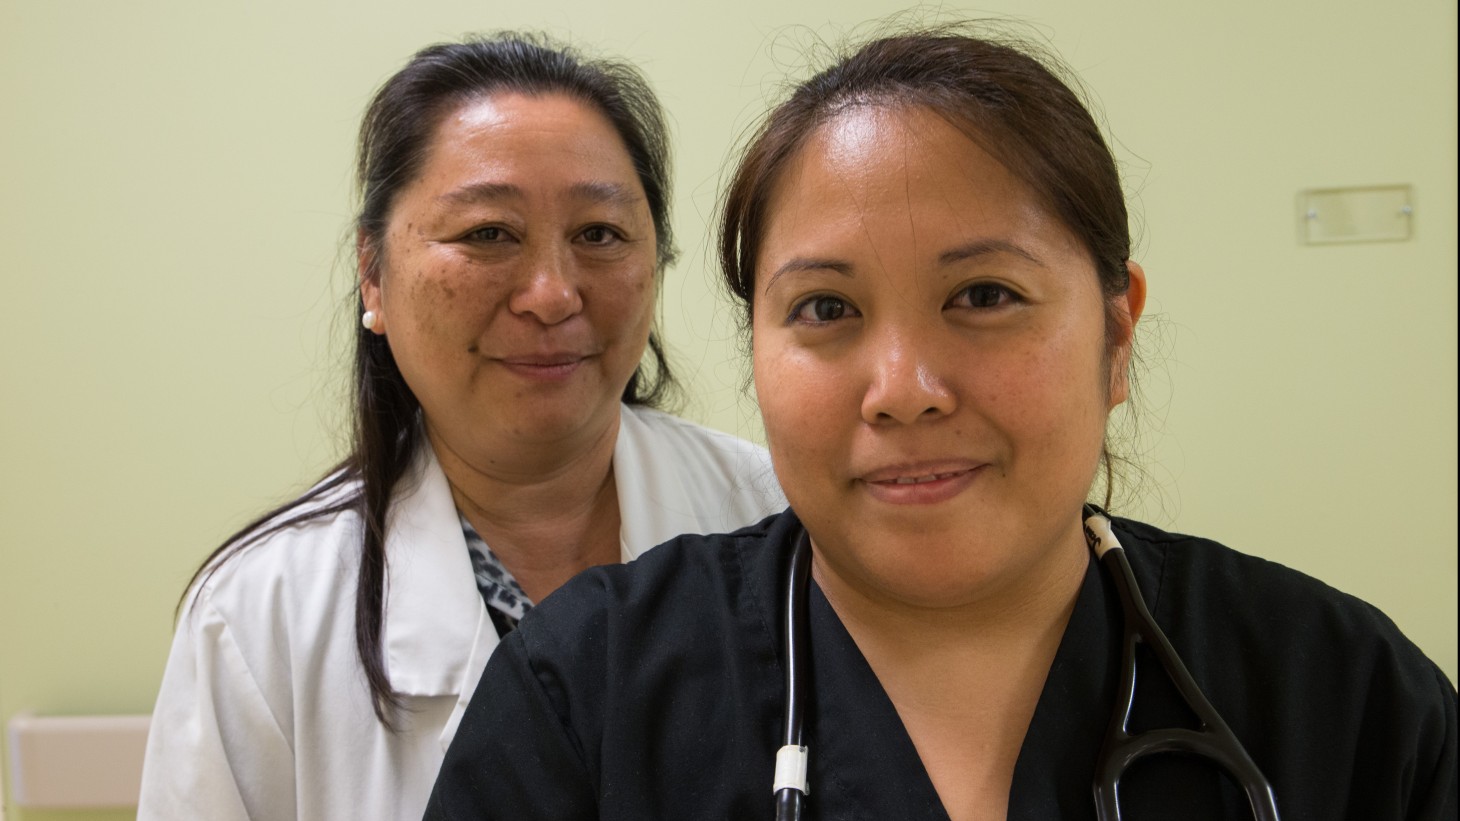 Manlee Velasco, RN, and Jenalyn Andres, RN